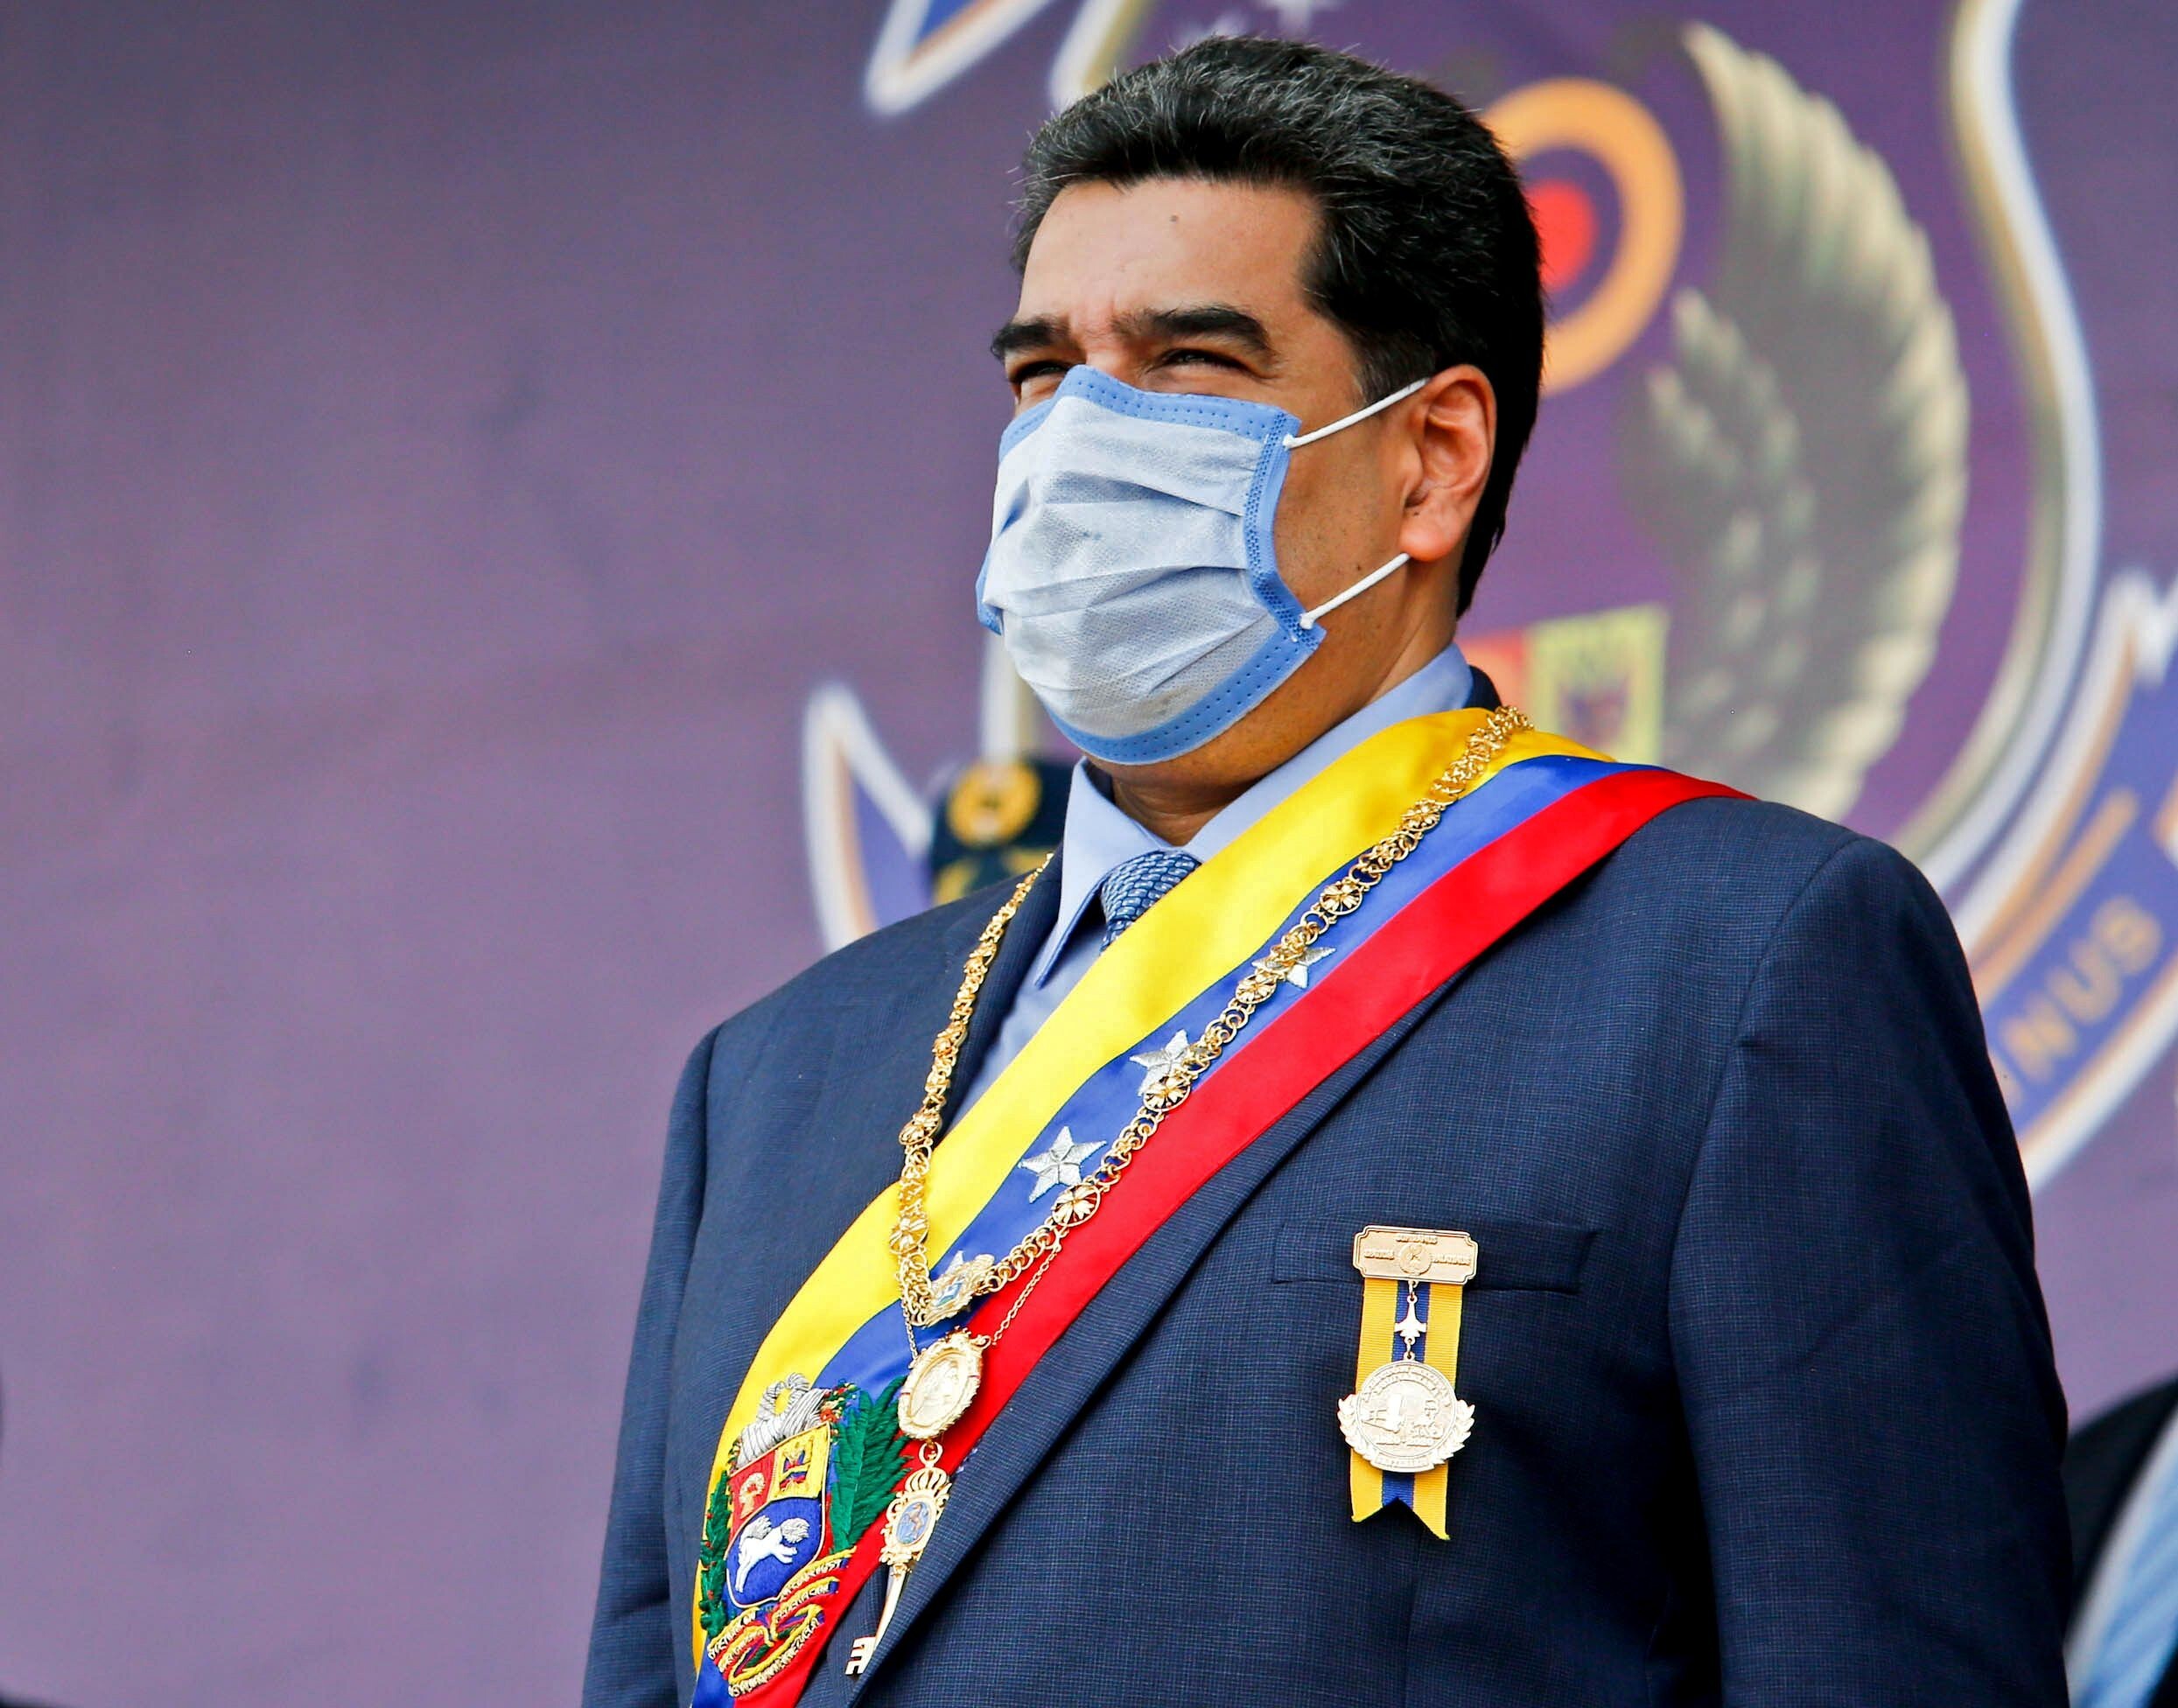 Venezuela's President Nicolas Maduro wearing a face mask at a ceremony in Maracay, Aragua state, Venezuela on Friday. Photo: Venezuelan presidency via AFP